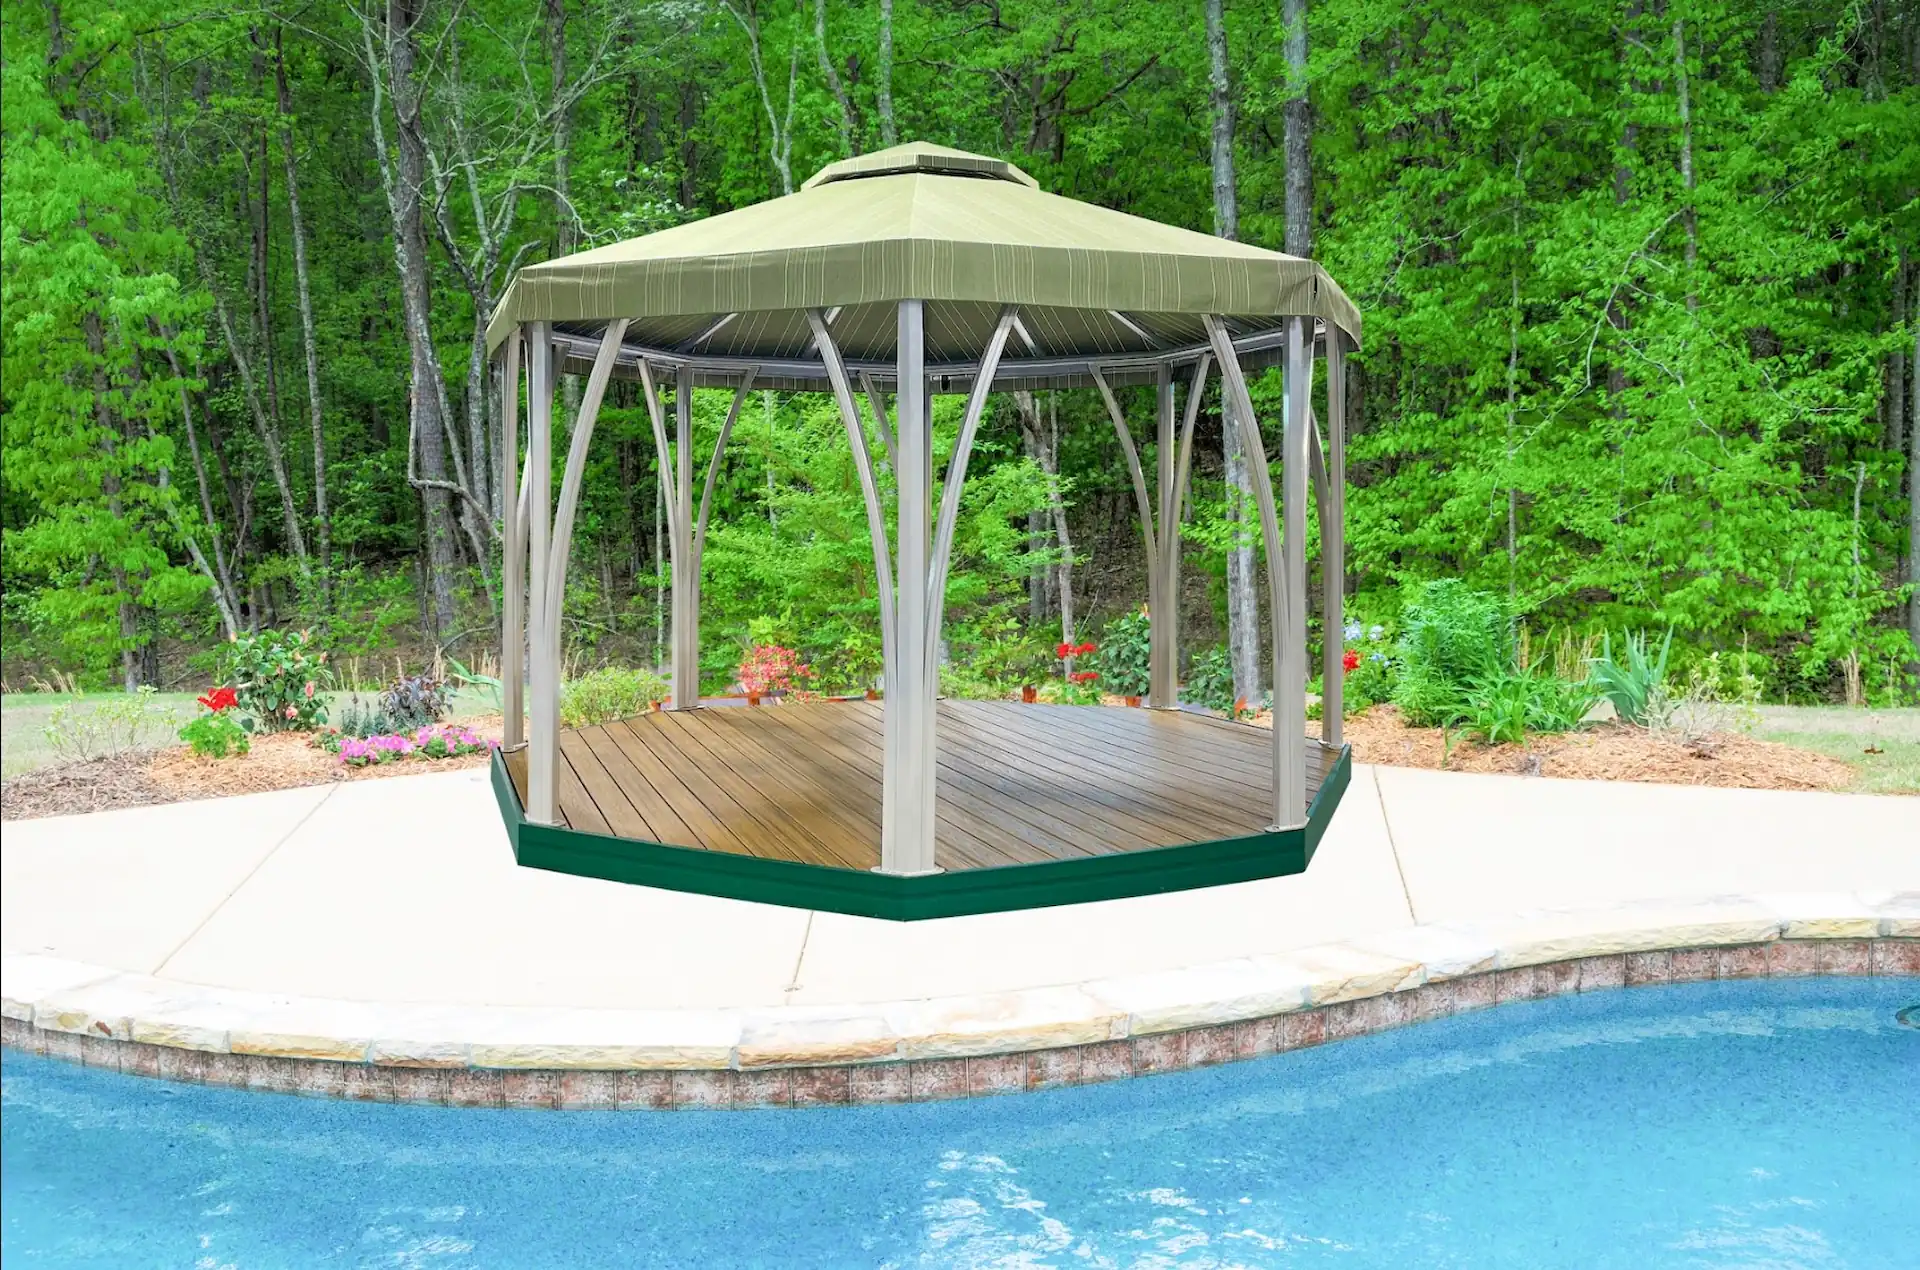 An octagonal open air cabana sits on a pool deck in the sunlight.